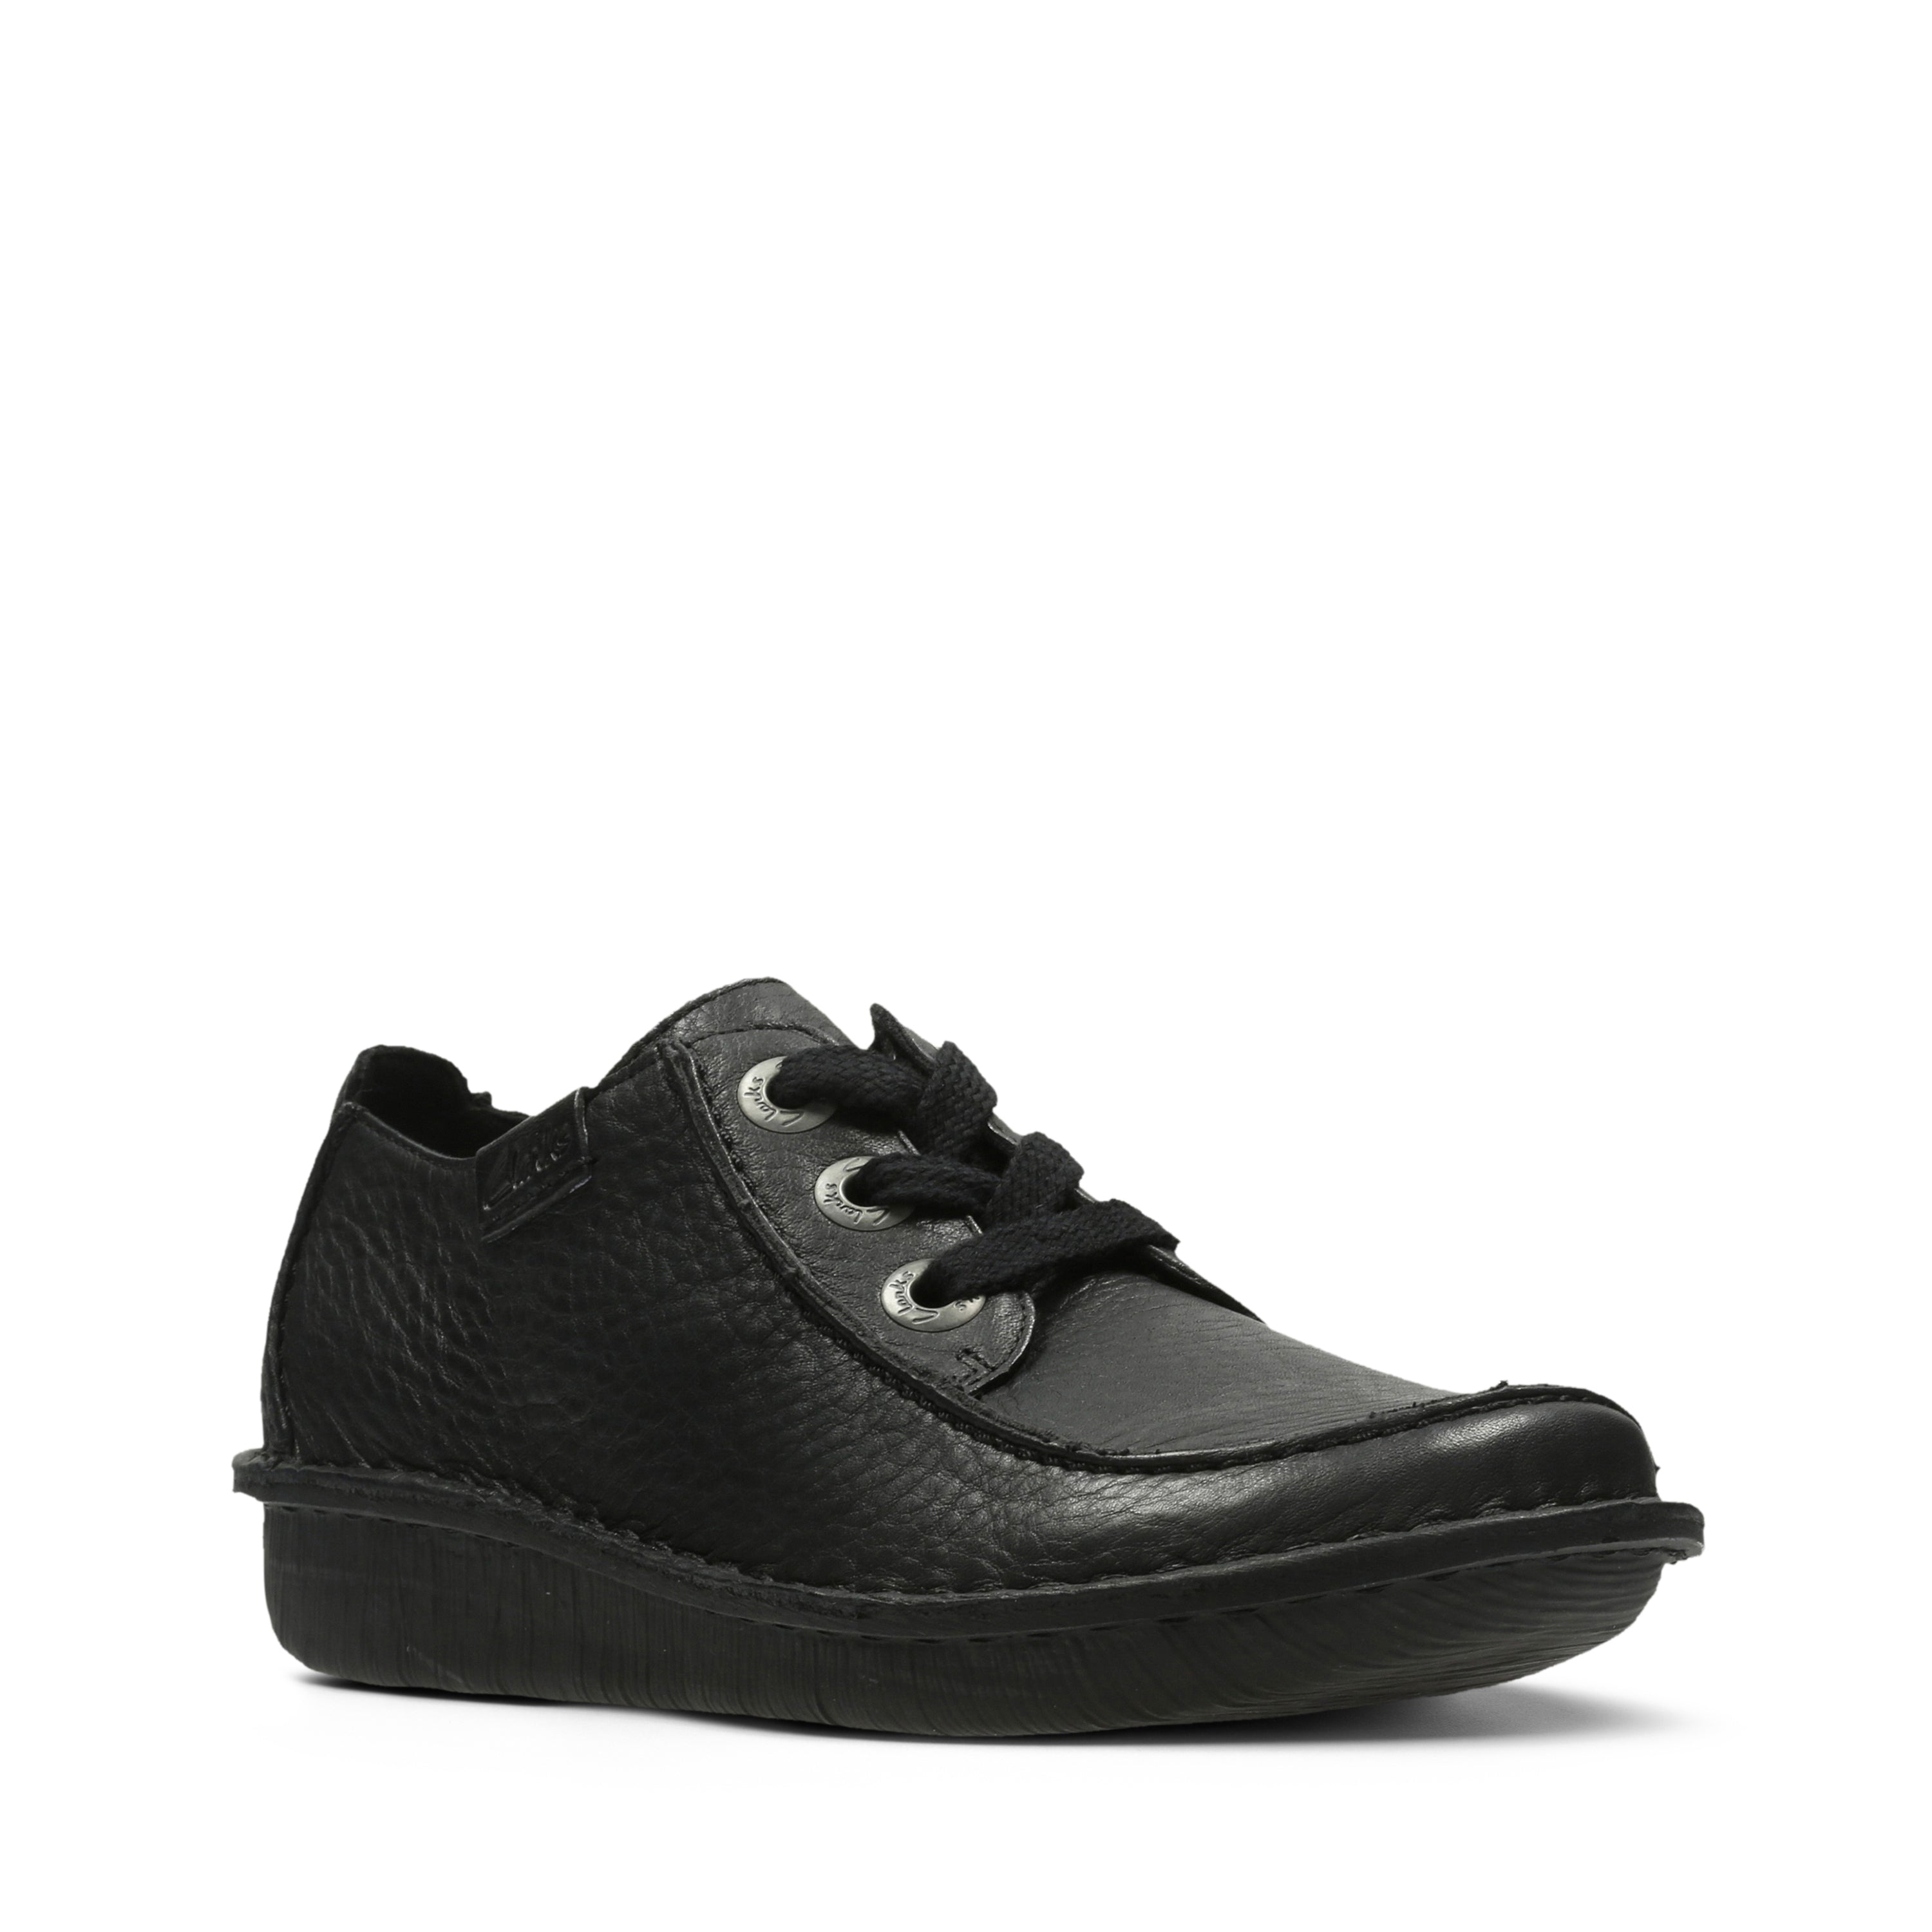 Clarks Funny Dream Black Leather